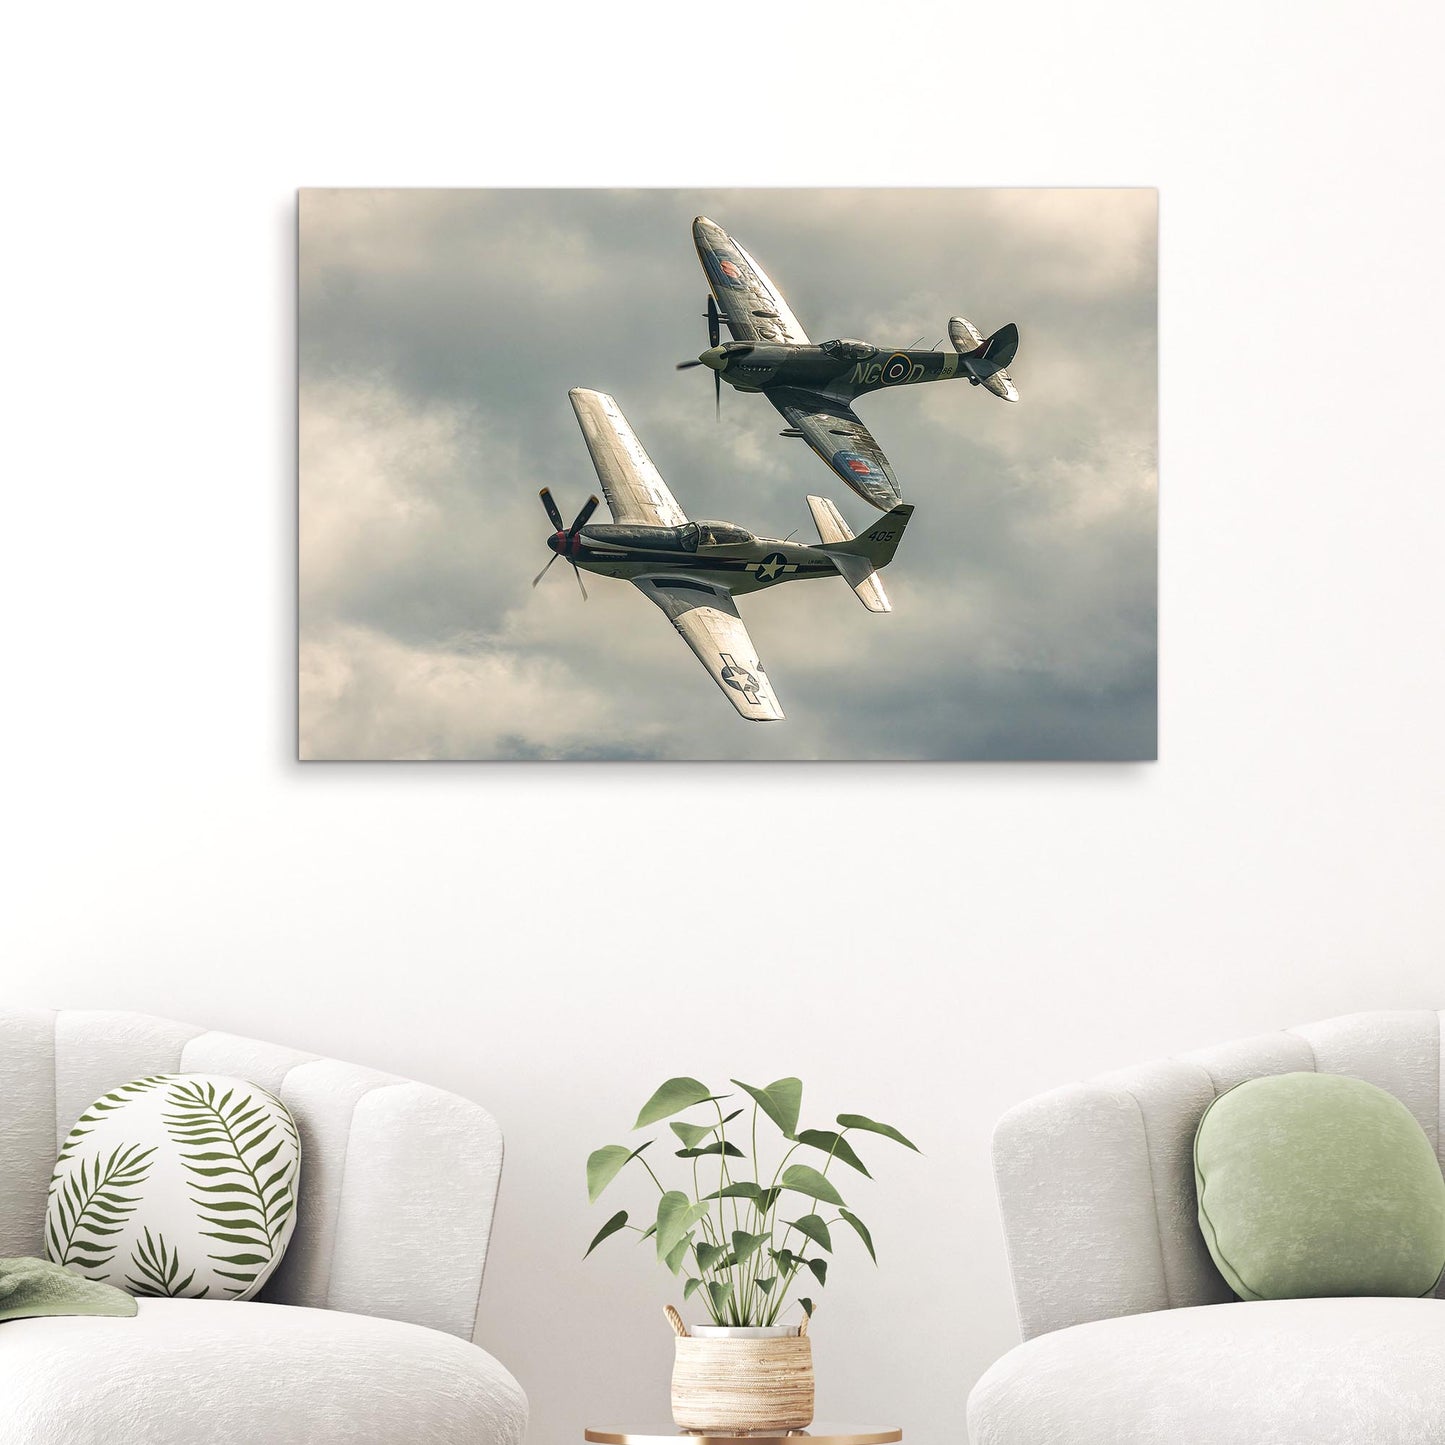 Fighter Plane P-51 Mustang Canvas Wall Art - Image by Tailored Canvases